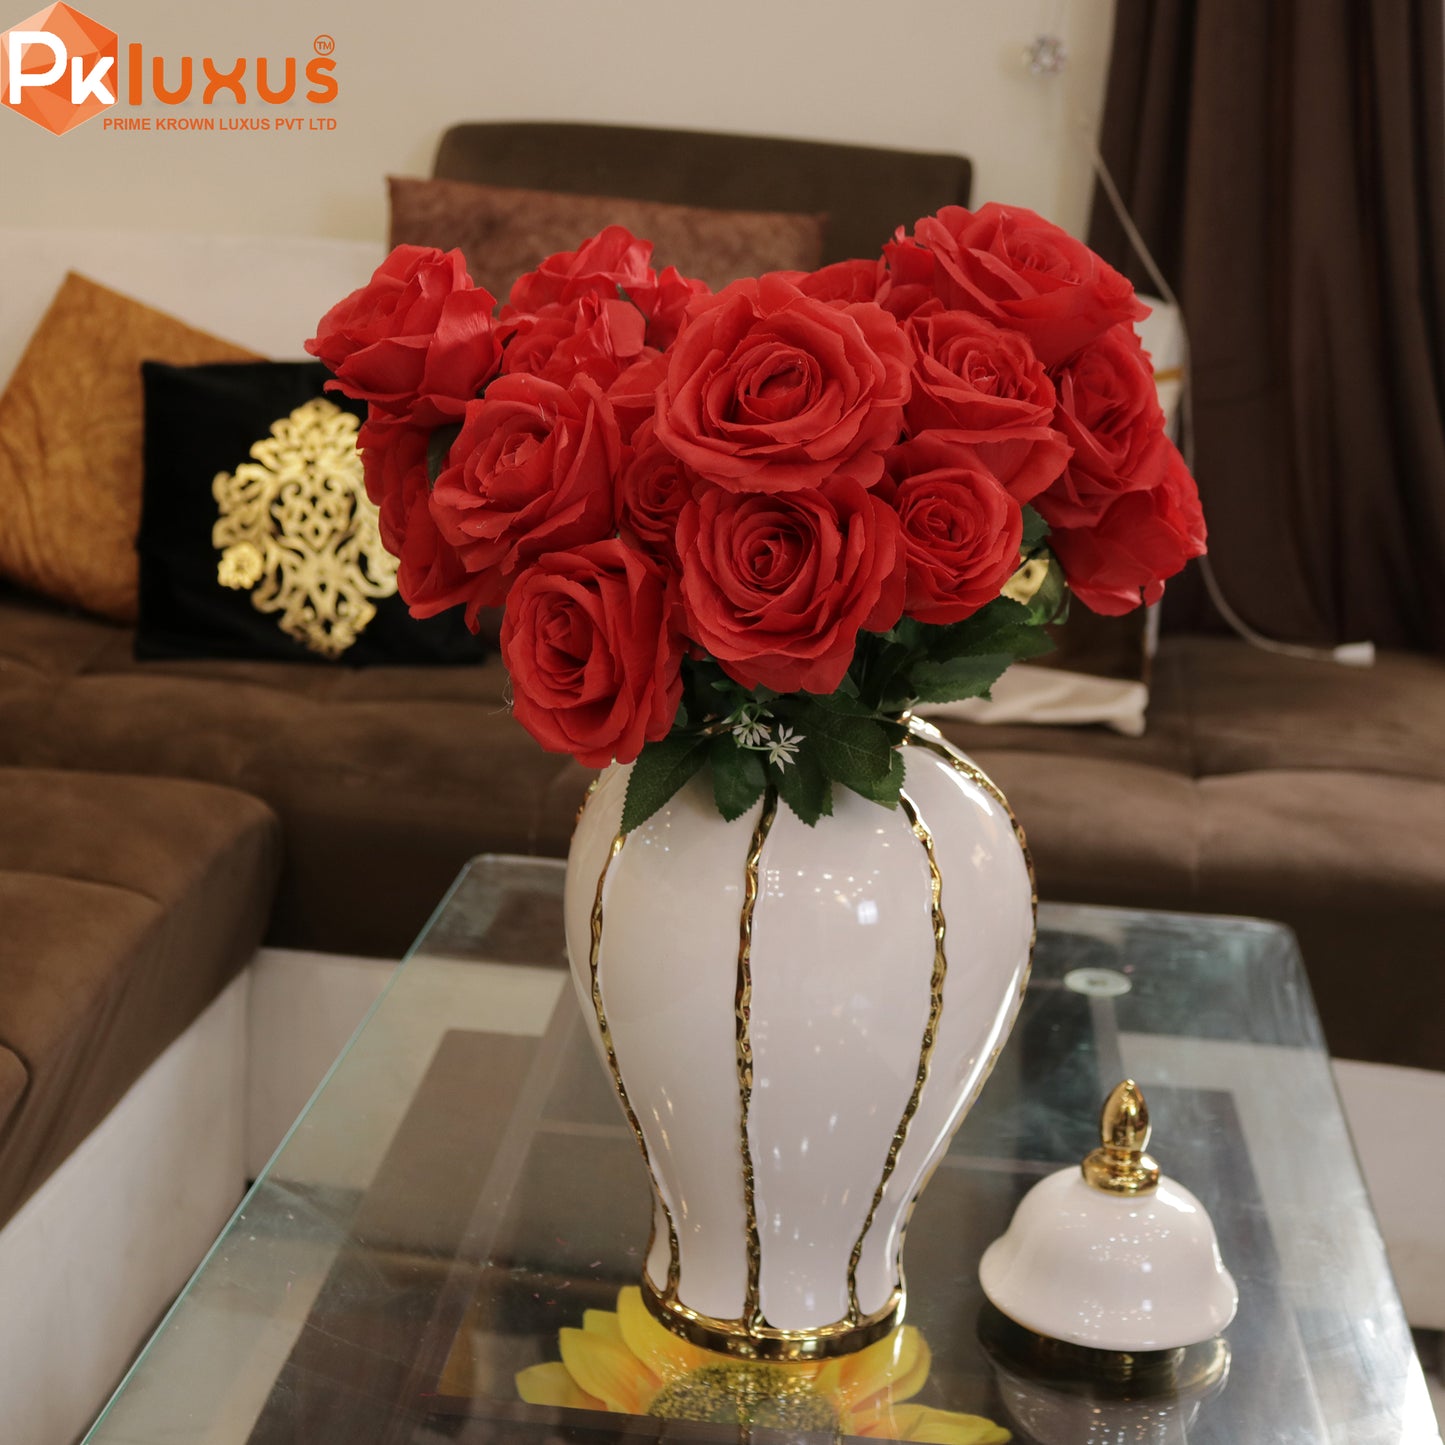 18 Inches Red Roses Bunch | PK LUXUS™ - PK LUXUS